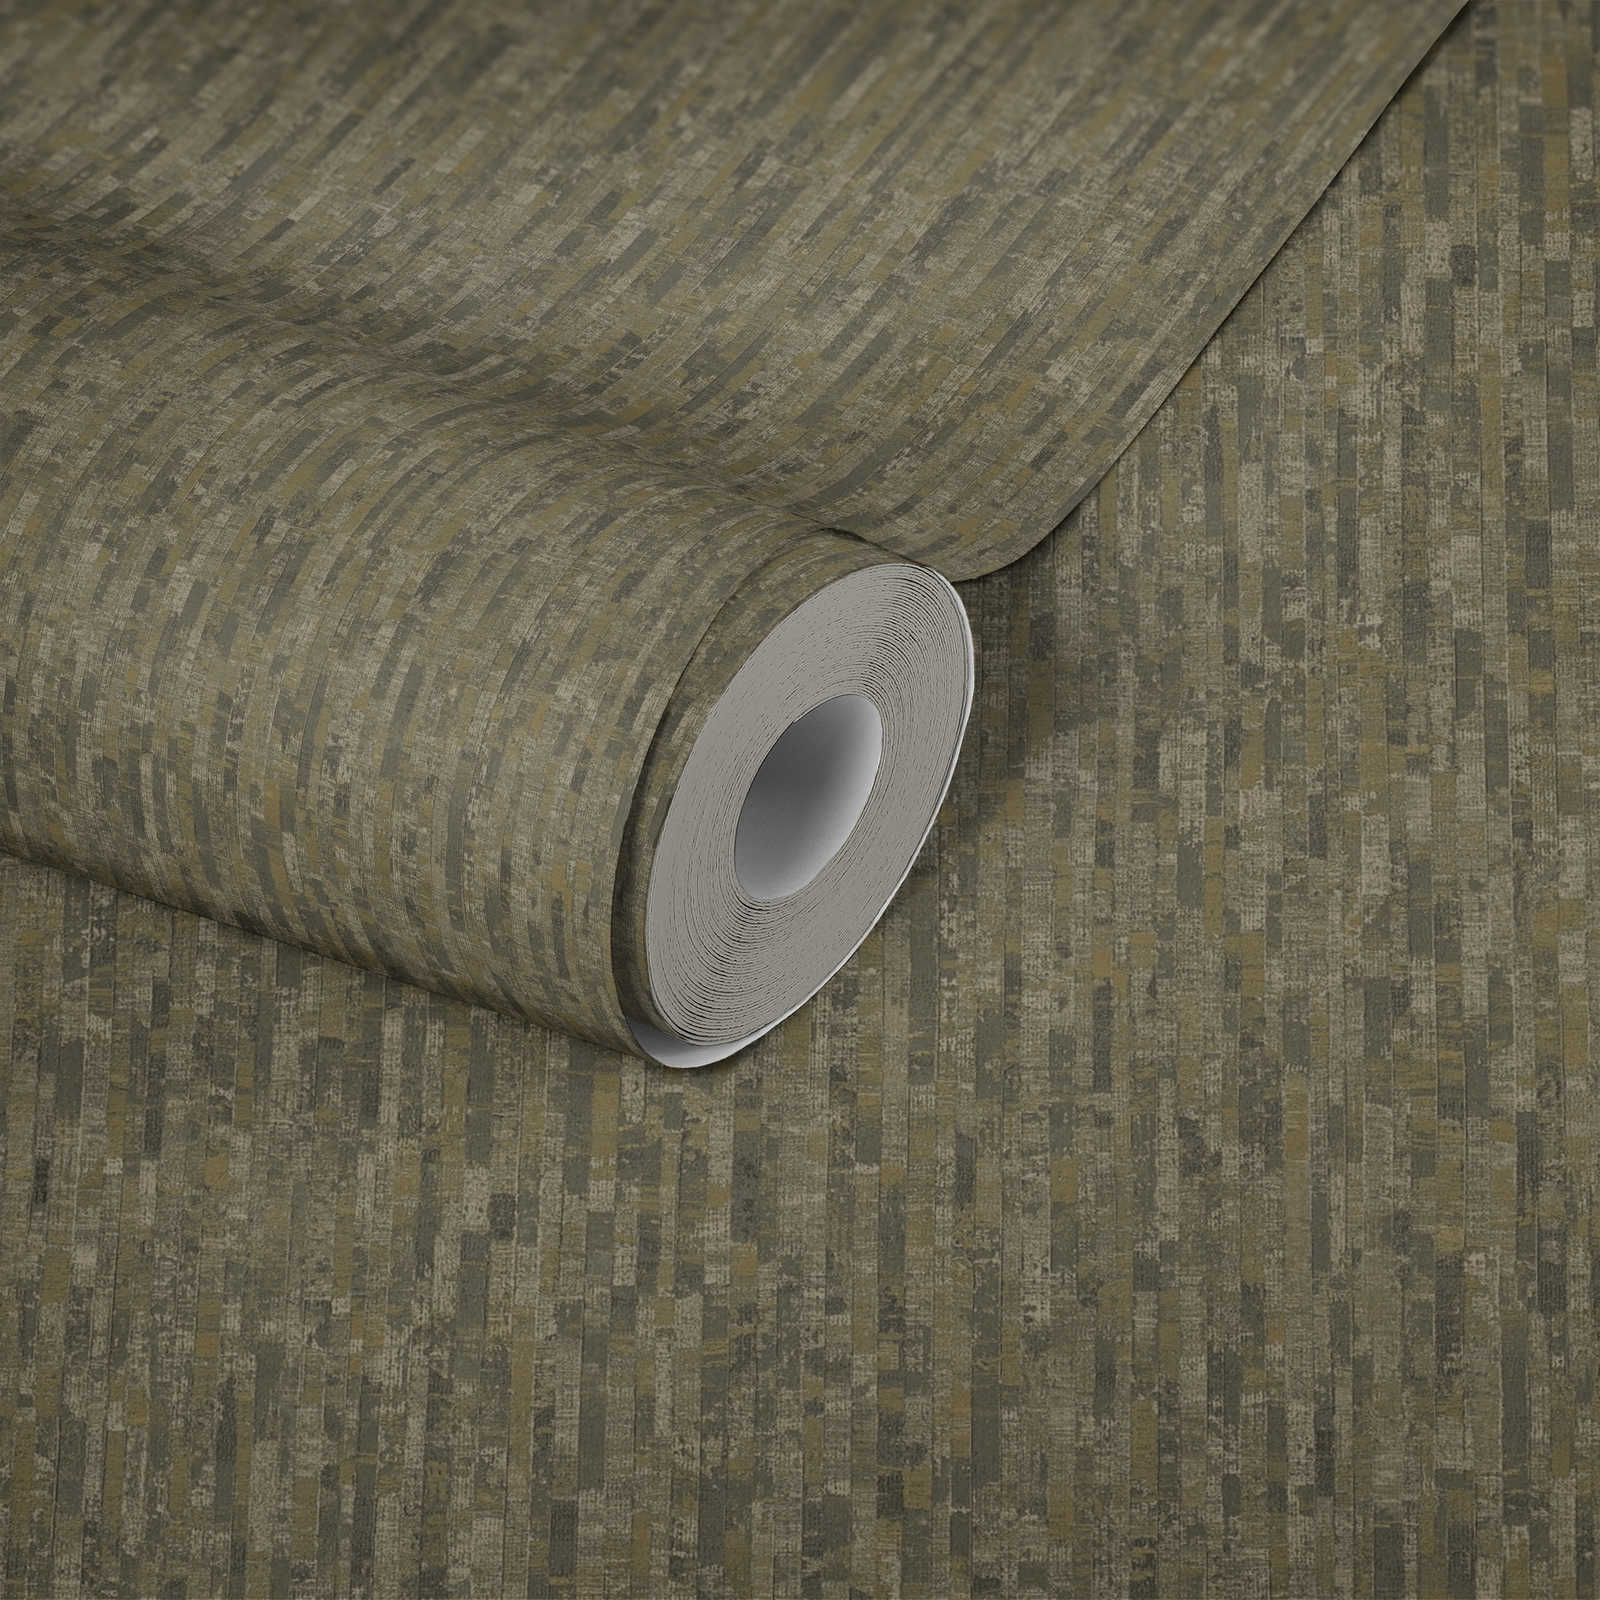             Olive brown wallpaper with natural textured pattern - Brown
        